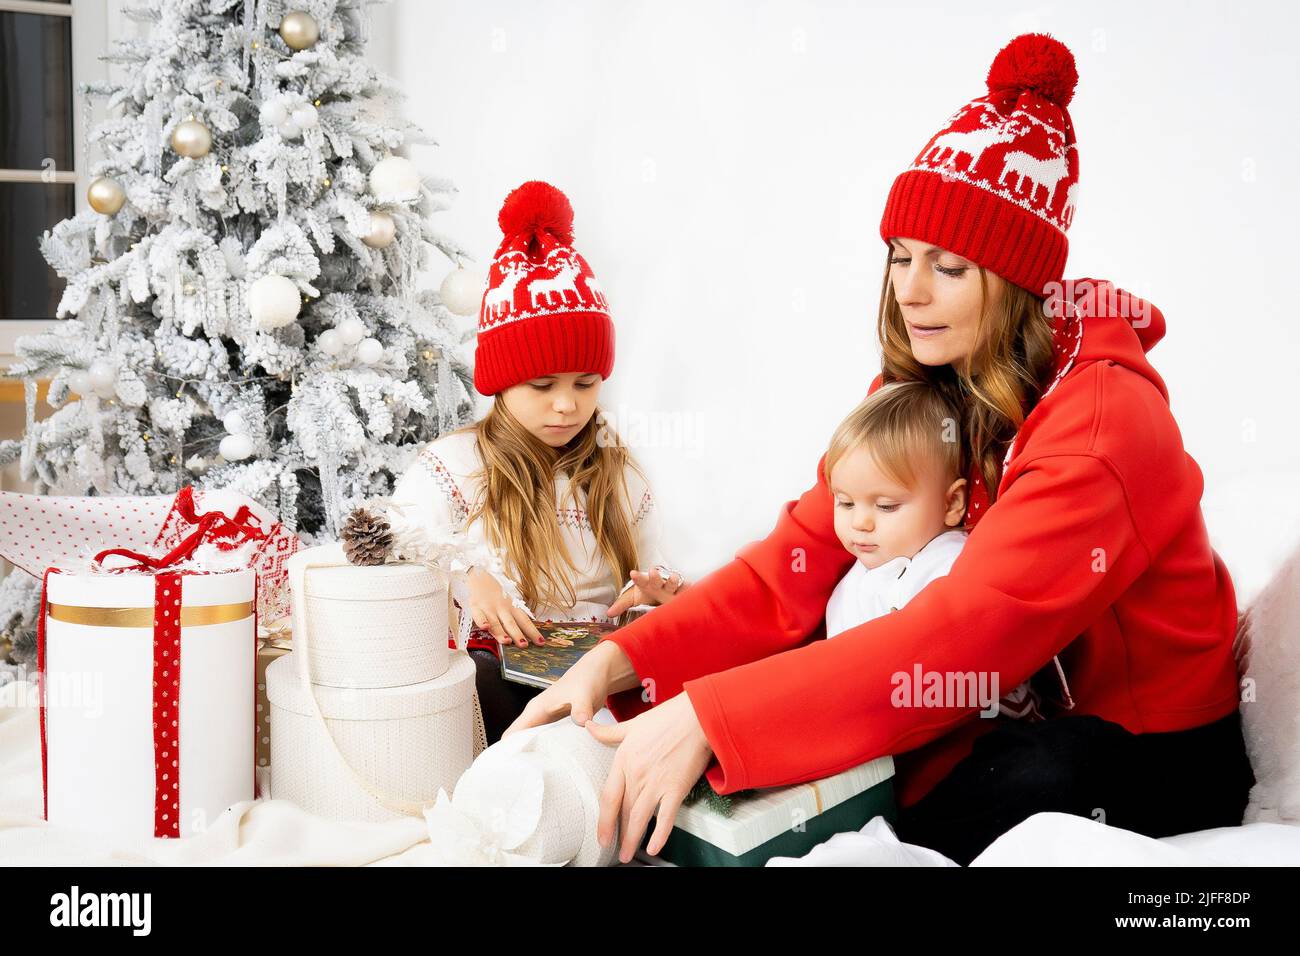 Mom and children in red sweaters and hats are enjoying Christmas together. Holiday fun with the whole family around the Christmas tree. Front view. Stock Photo